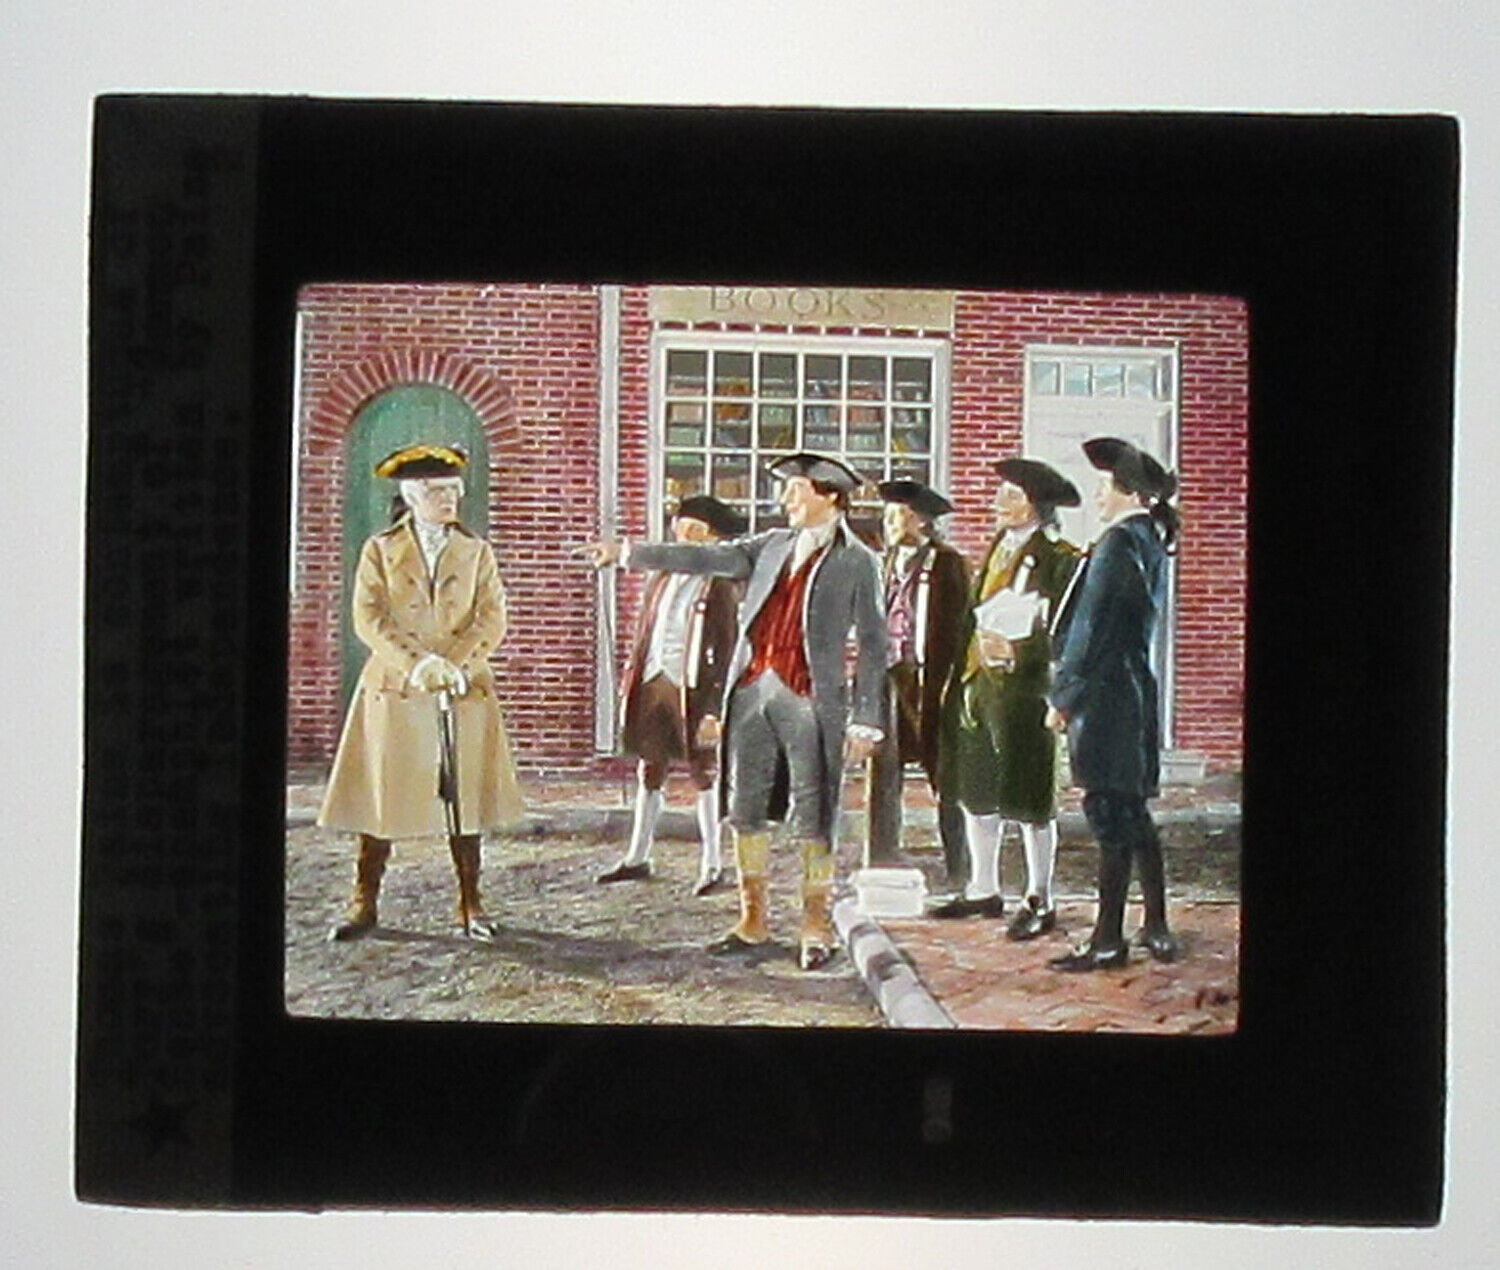  ACTORS PORTRAY THOMAS PAINE AND POLITICAL FIGURES. PHOTO ON GLASS. HAND COLORED